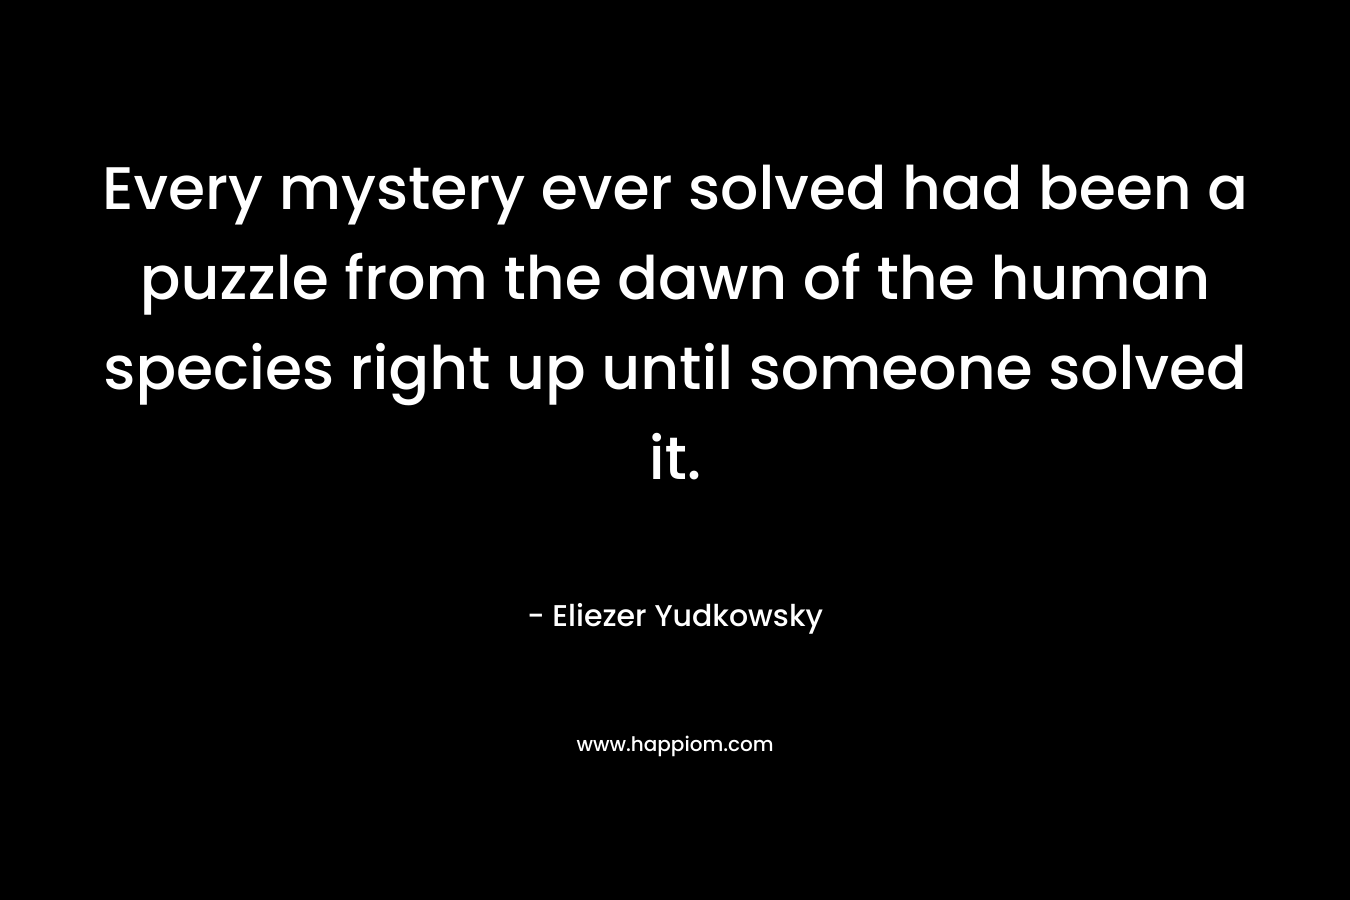 Every mystery ever solved had been a puzzle from the dawn of the human species right up until someone solved it.